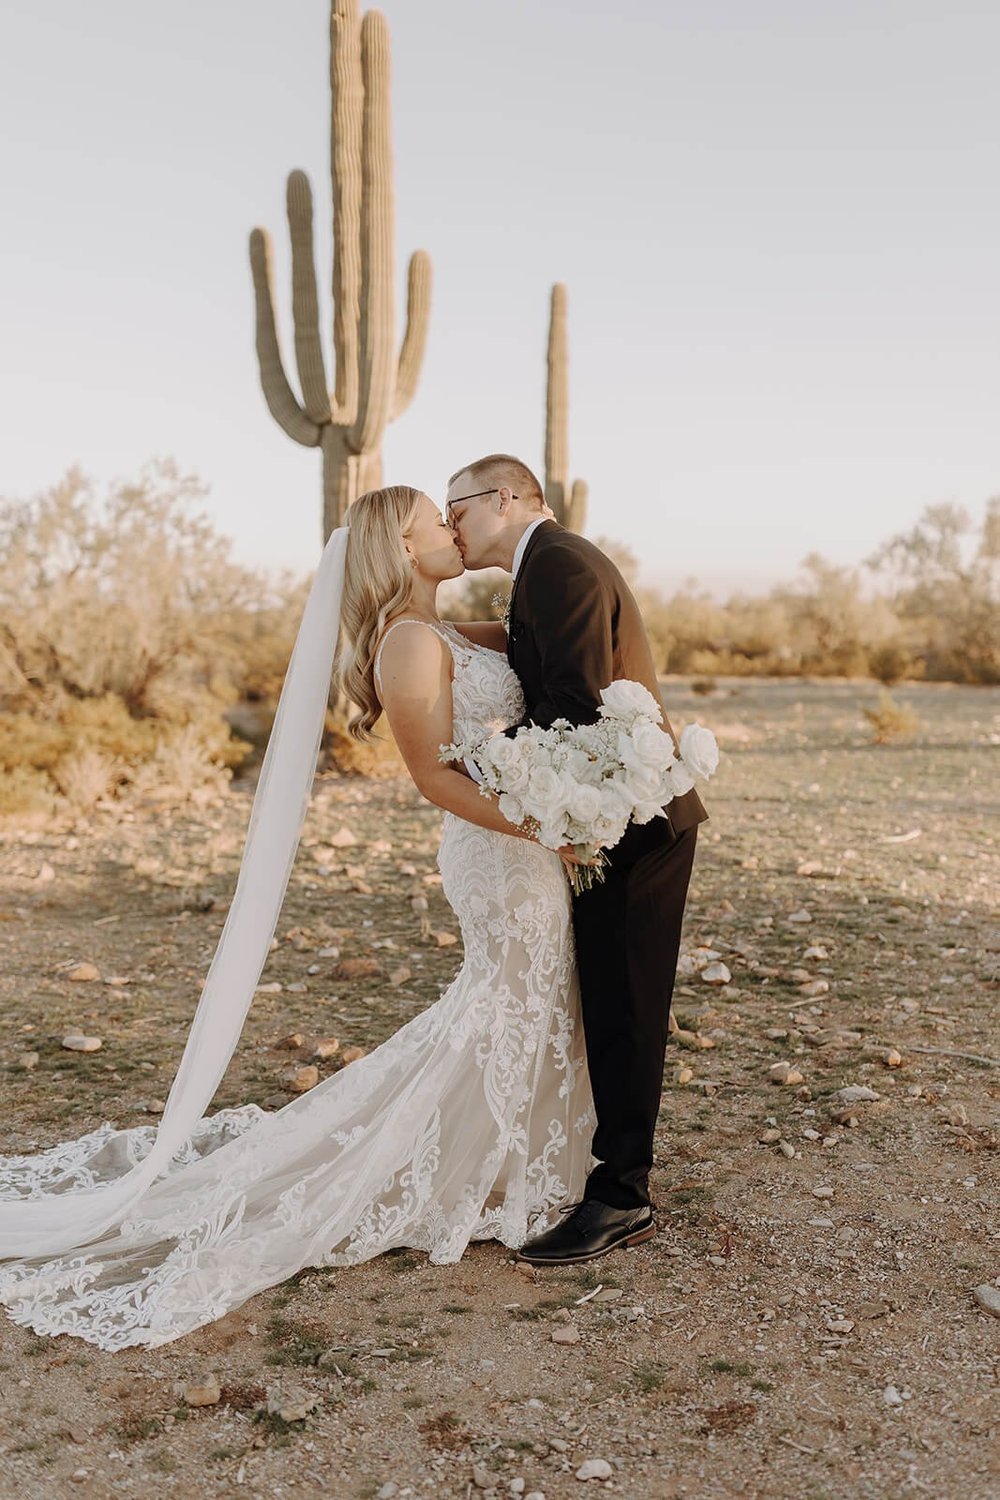 Bride and groom kiss in front of a cactus in the desert in Arizona destination wedding